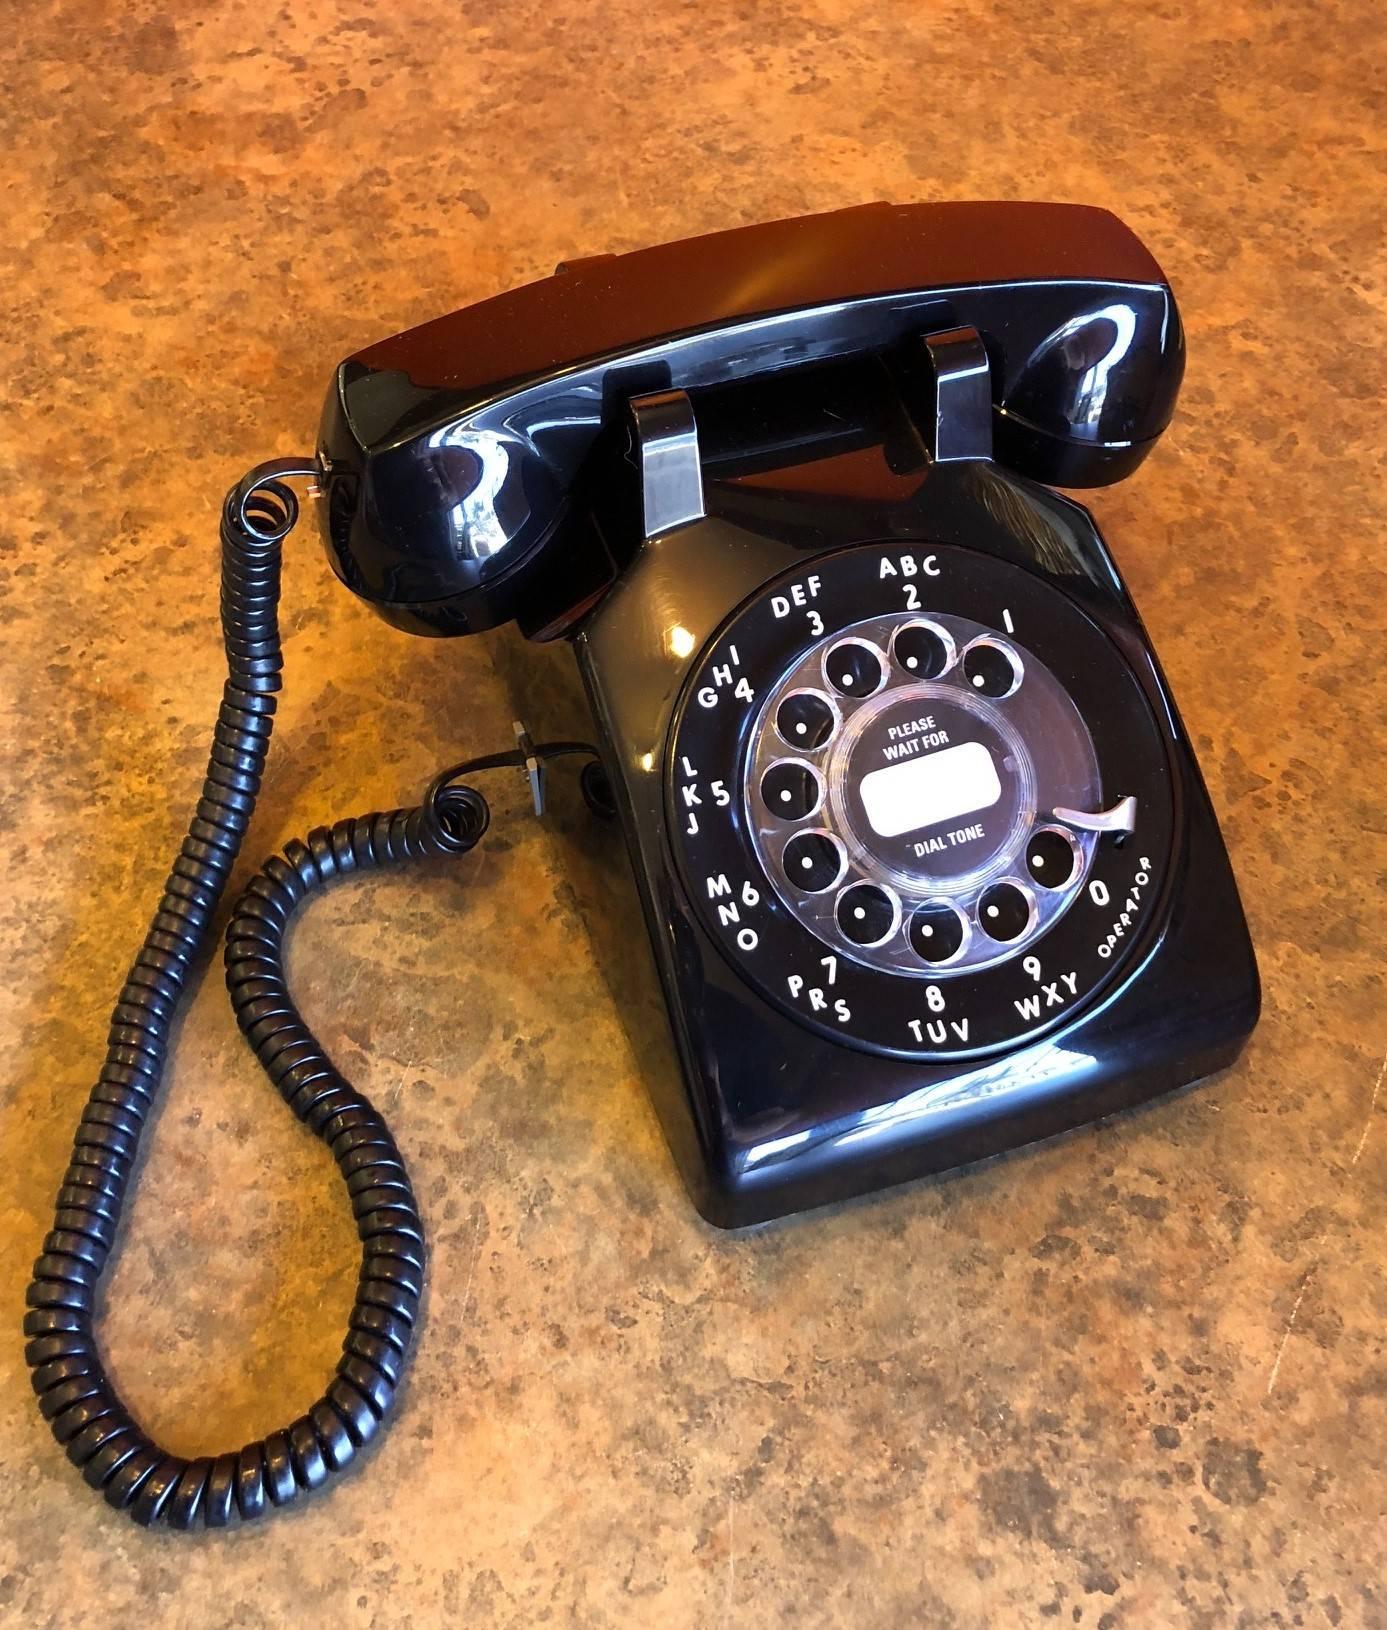 Midcentury ITT rotary dial desktop telephone with original box, circa 1970s. Phone appears to have never been used and is in very good condition with a few small blemishes.